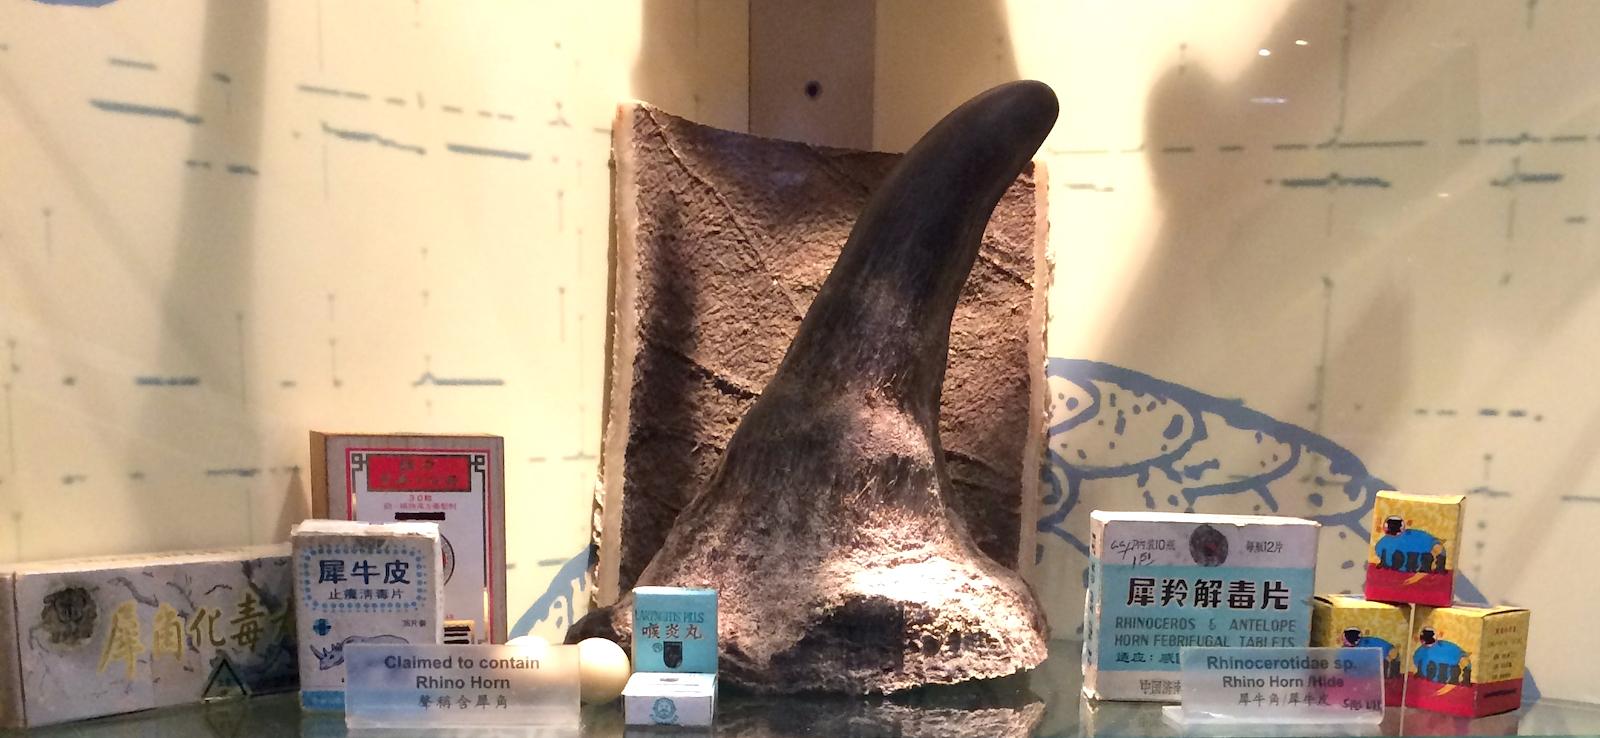 Products that claim to contain rhino horn